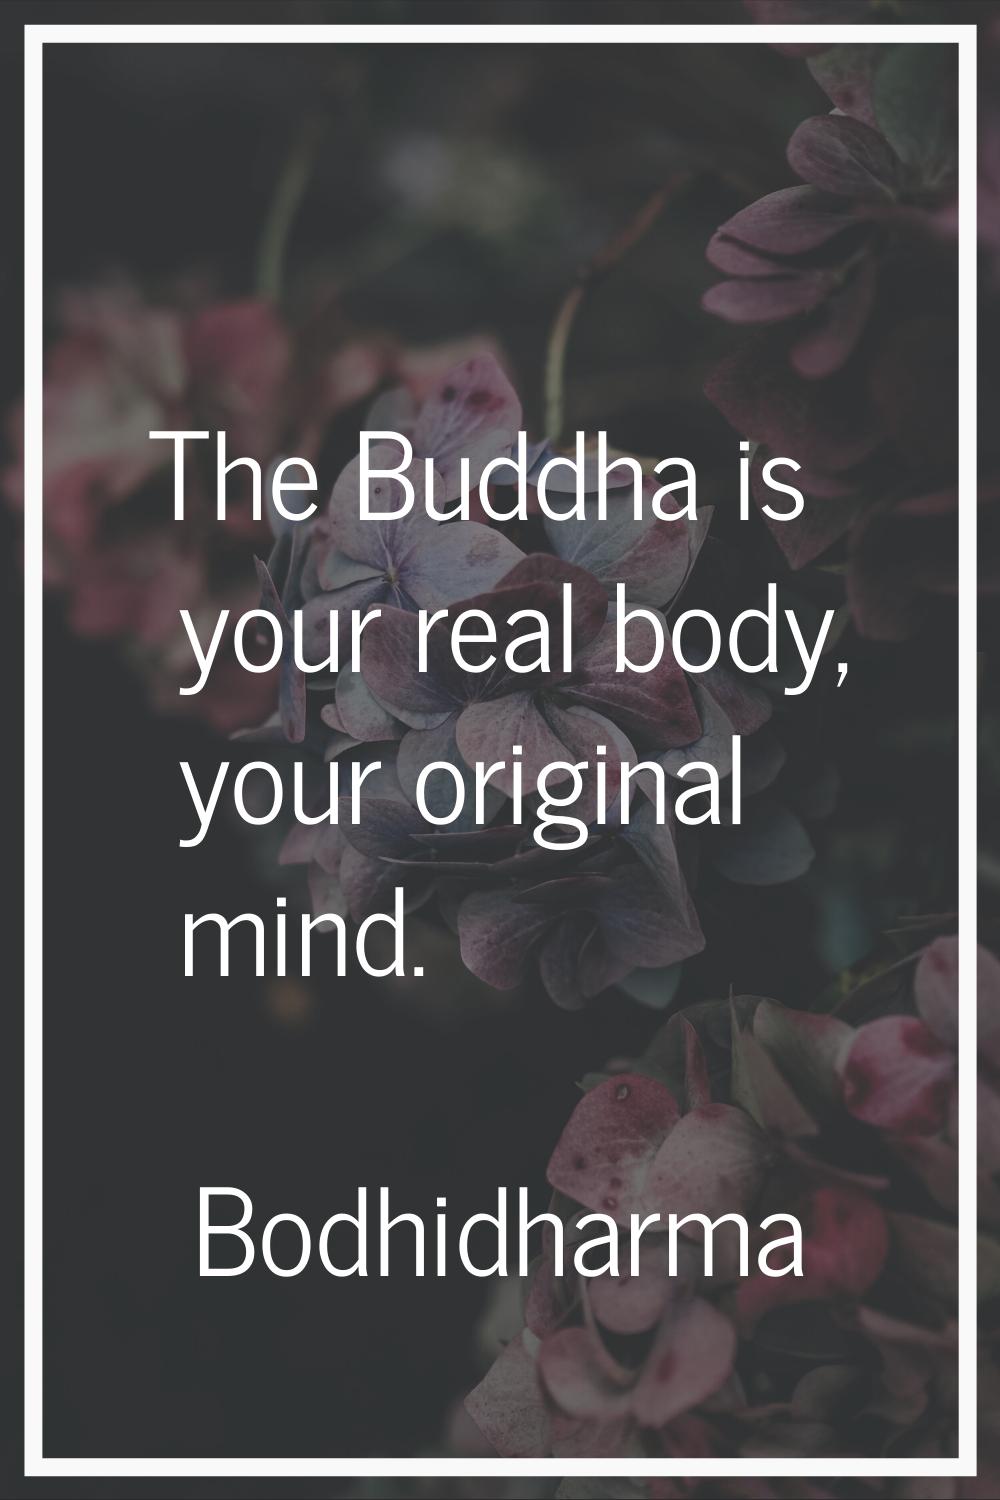 The Buddha is your real body, your original mind.